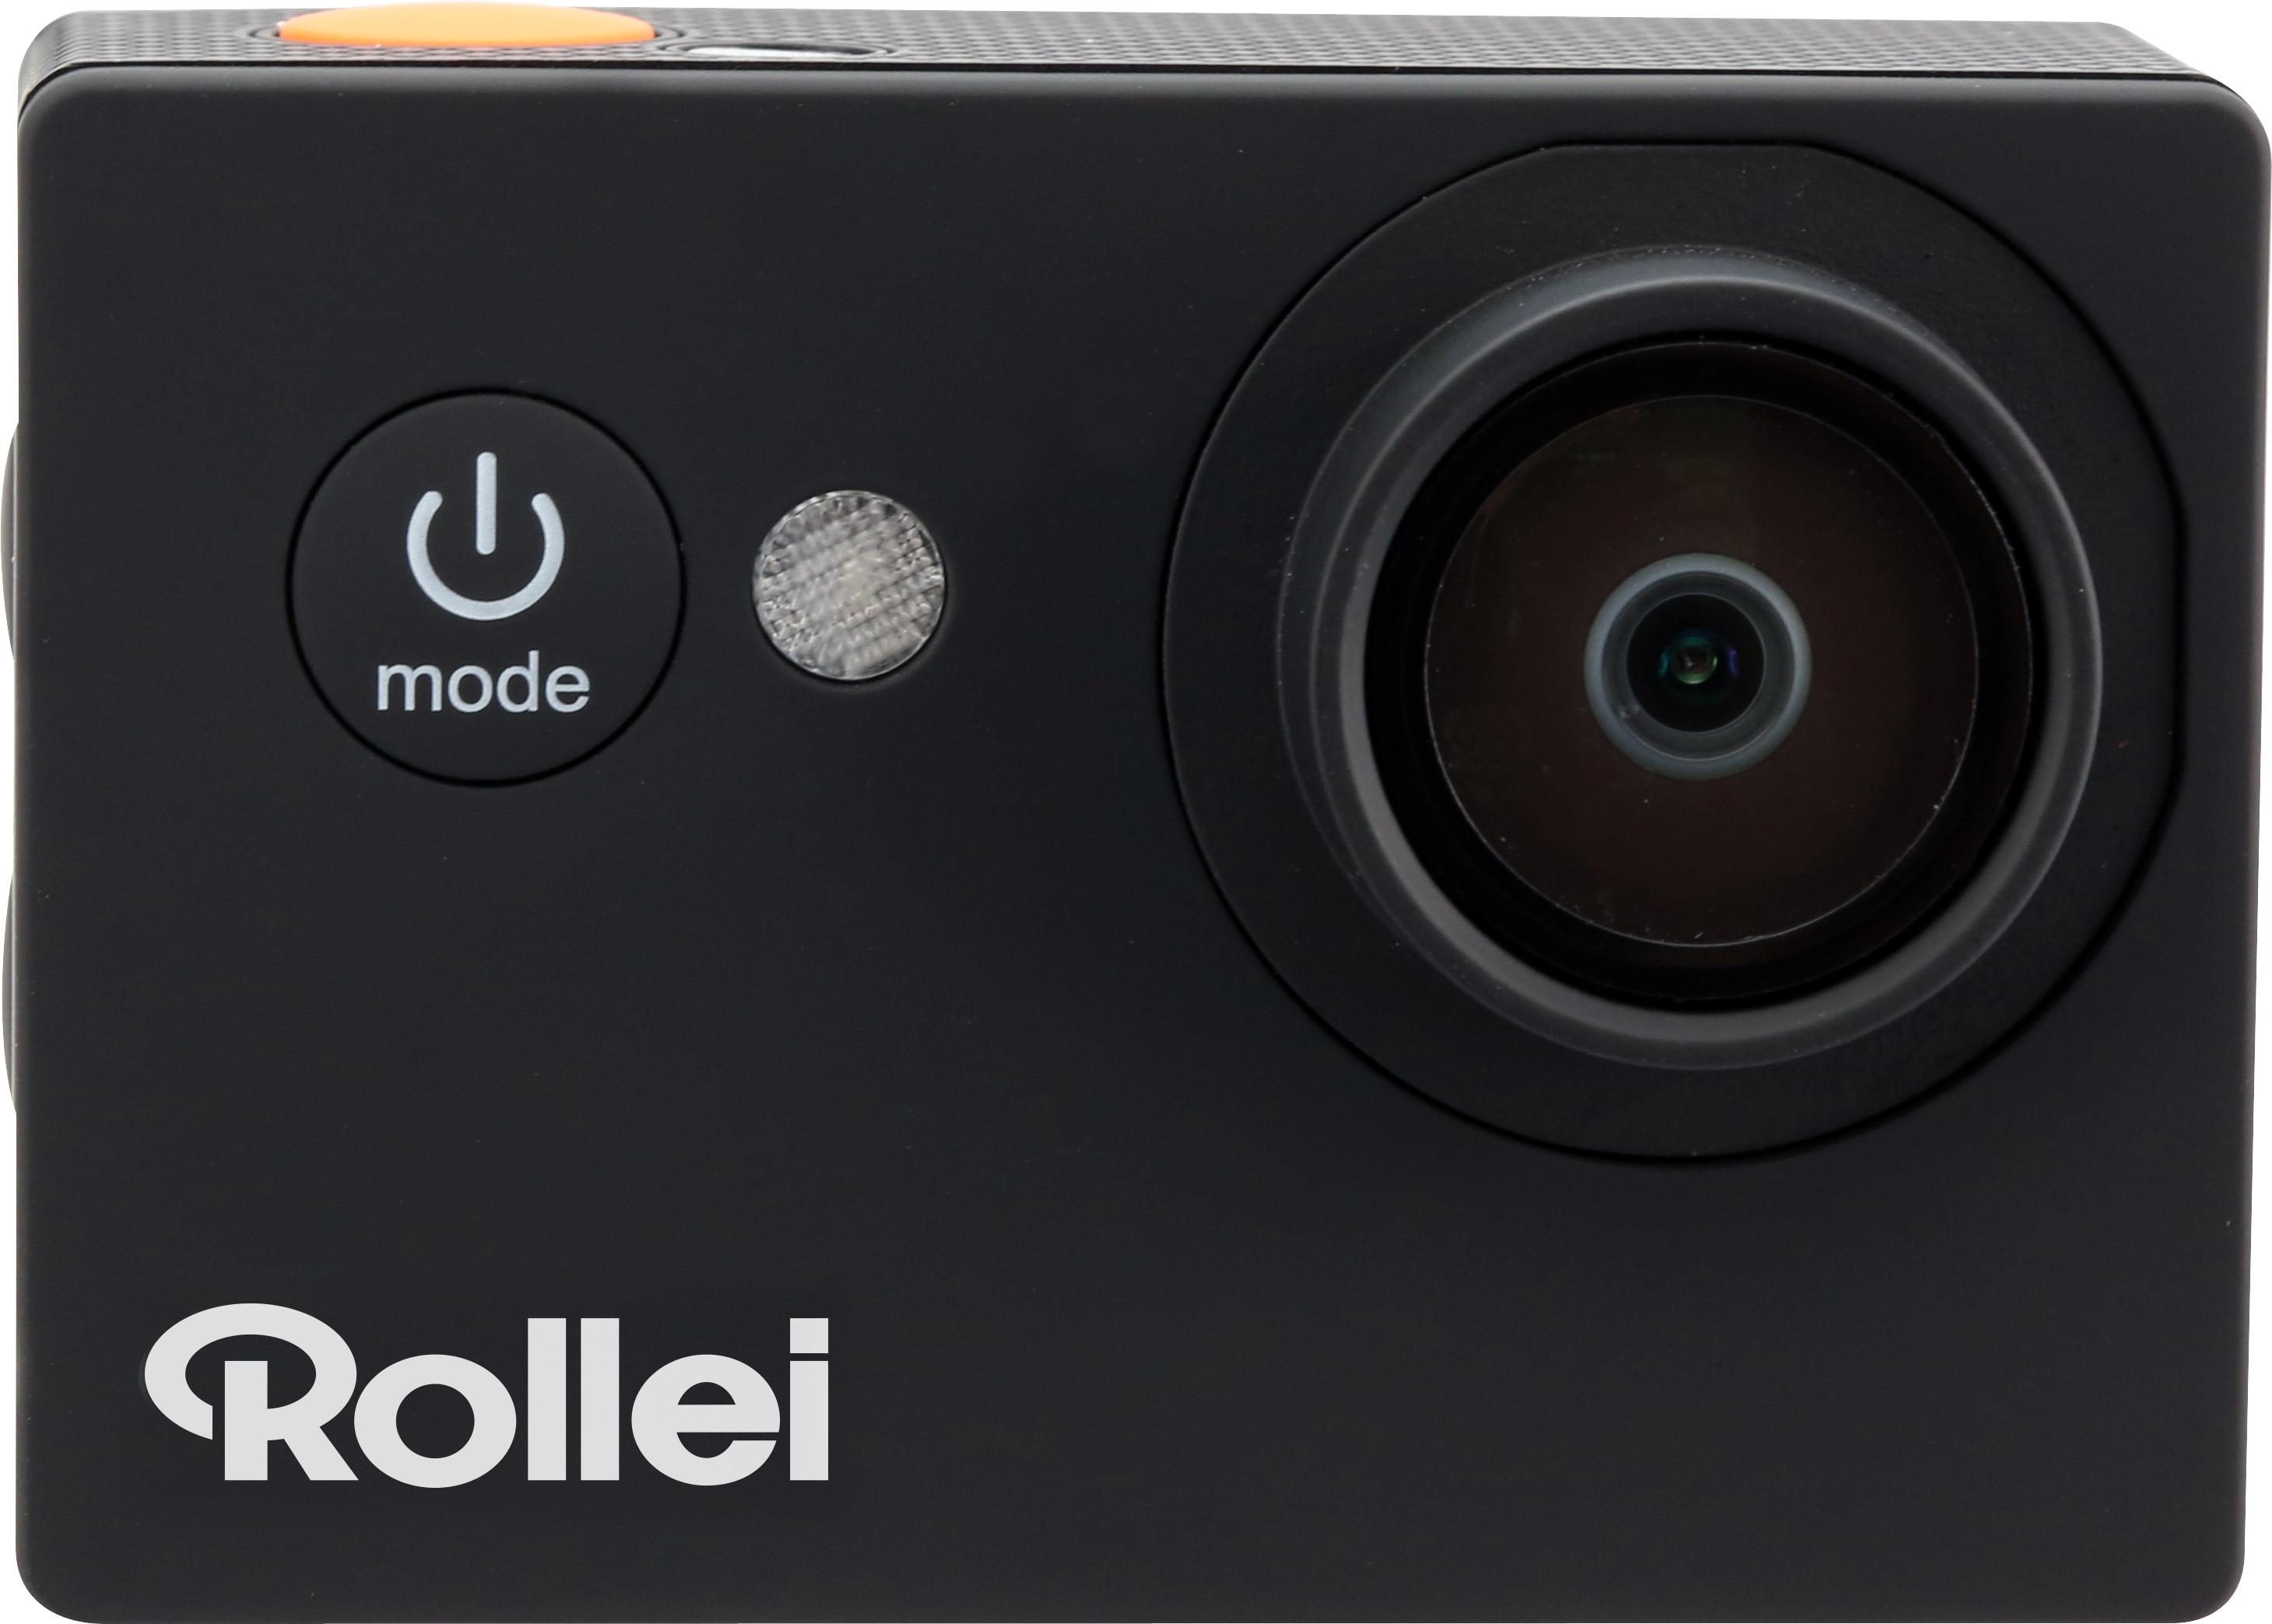 Rollei ROLLEI actioncam 415 1080p (Full HD) camcorder, WLAN